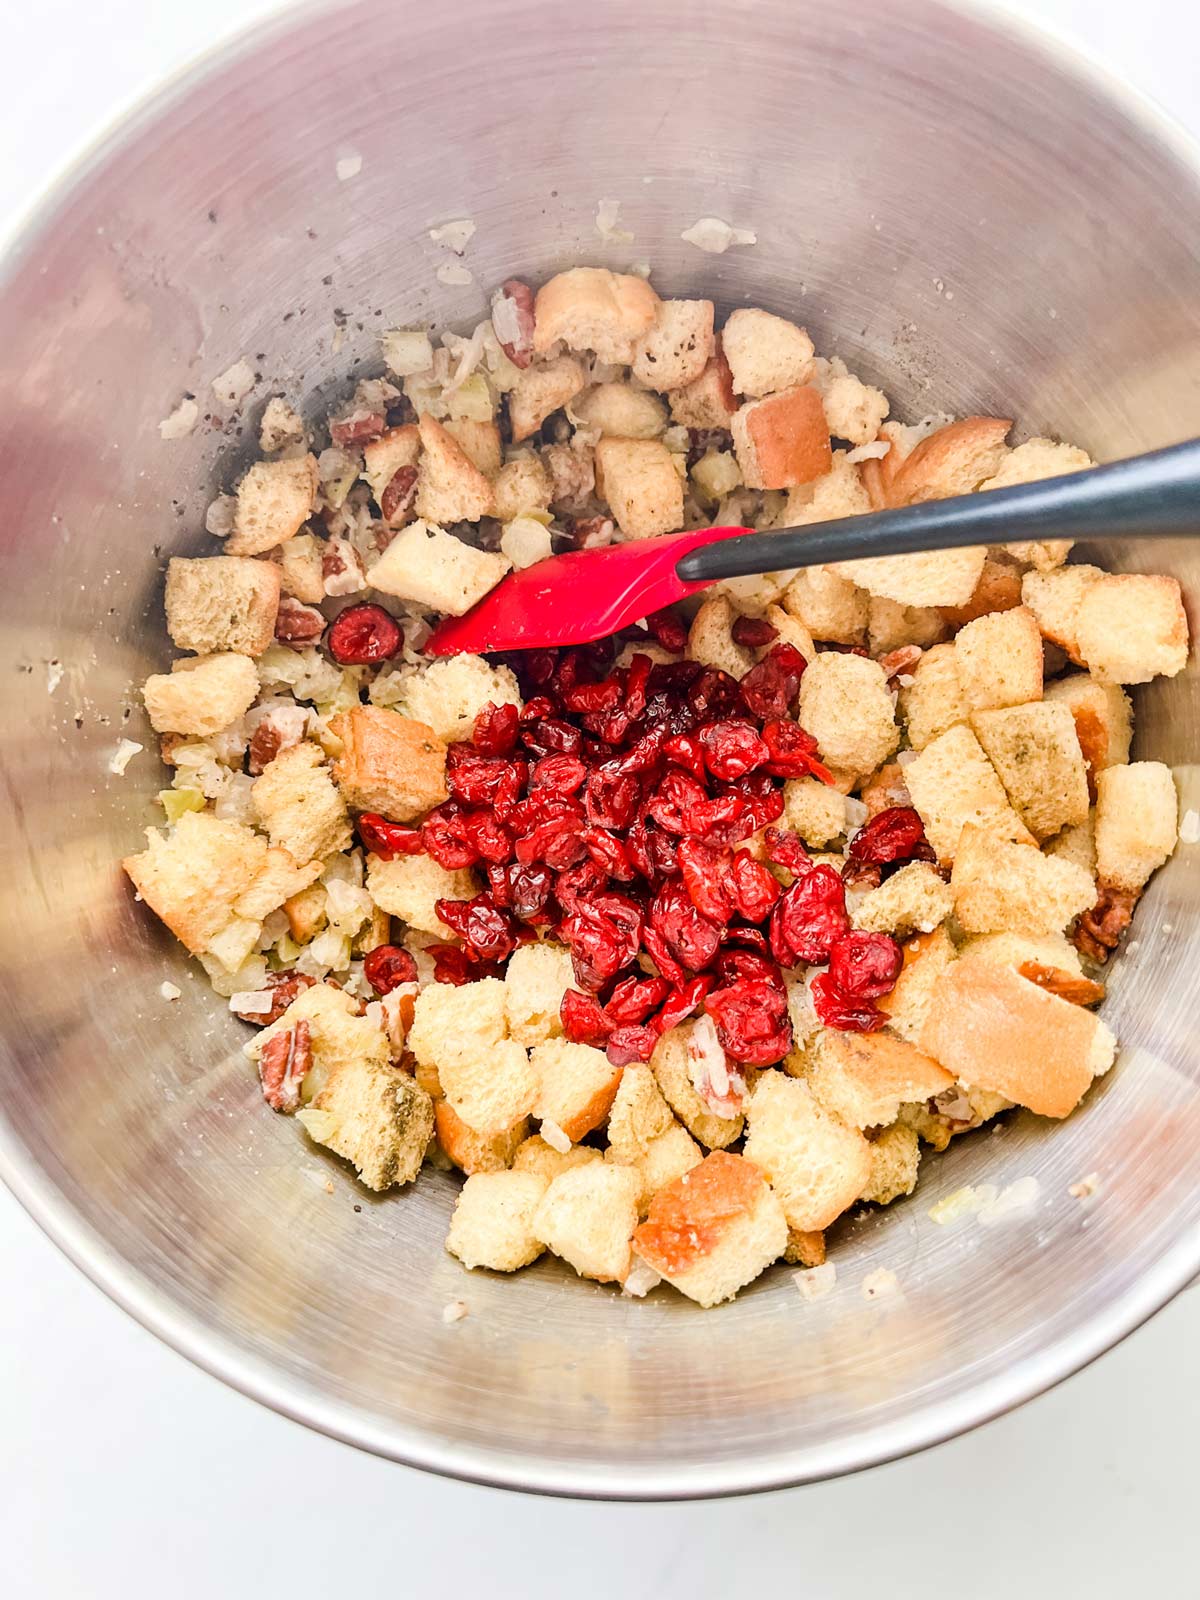 cranberries being tossed in a bowl with the remaining stuffing ingredients.